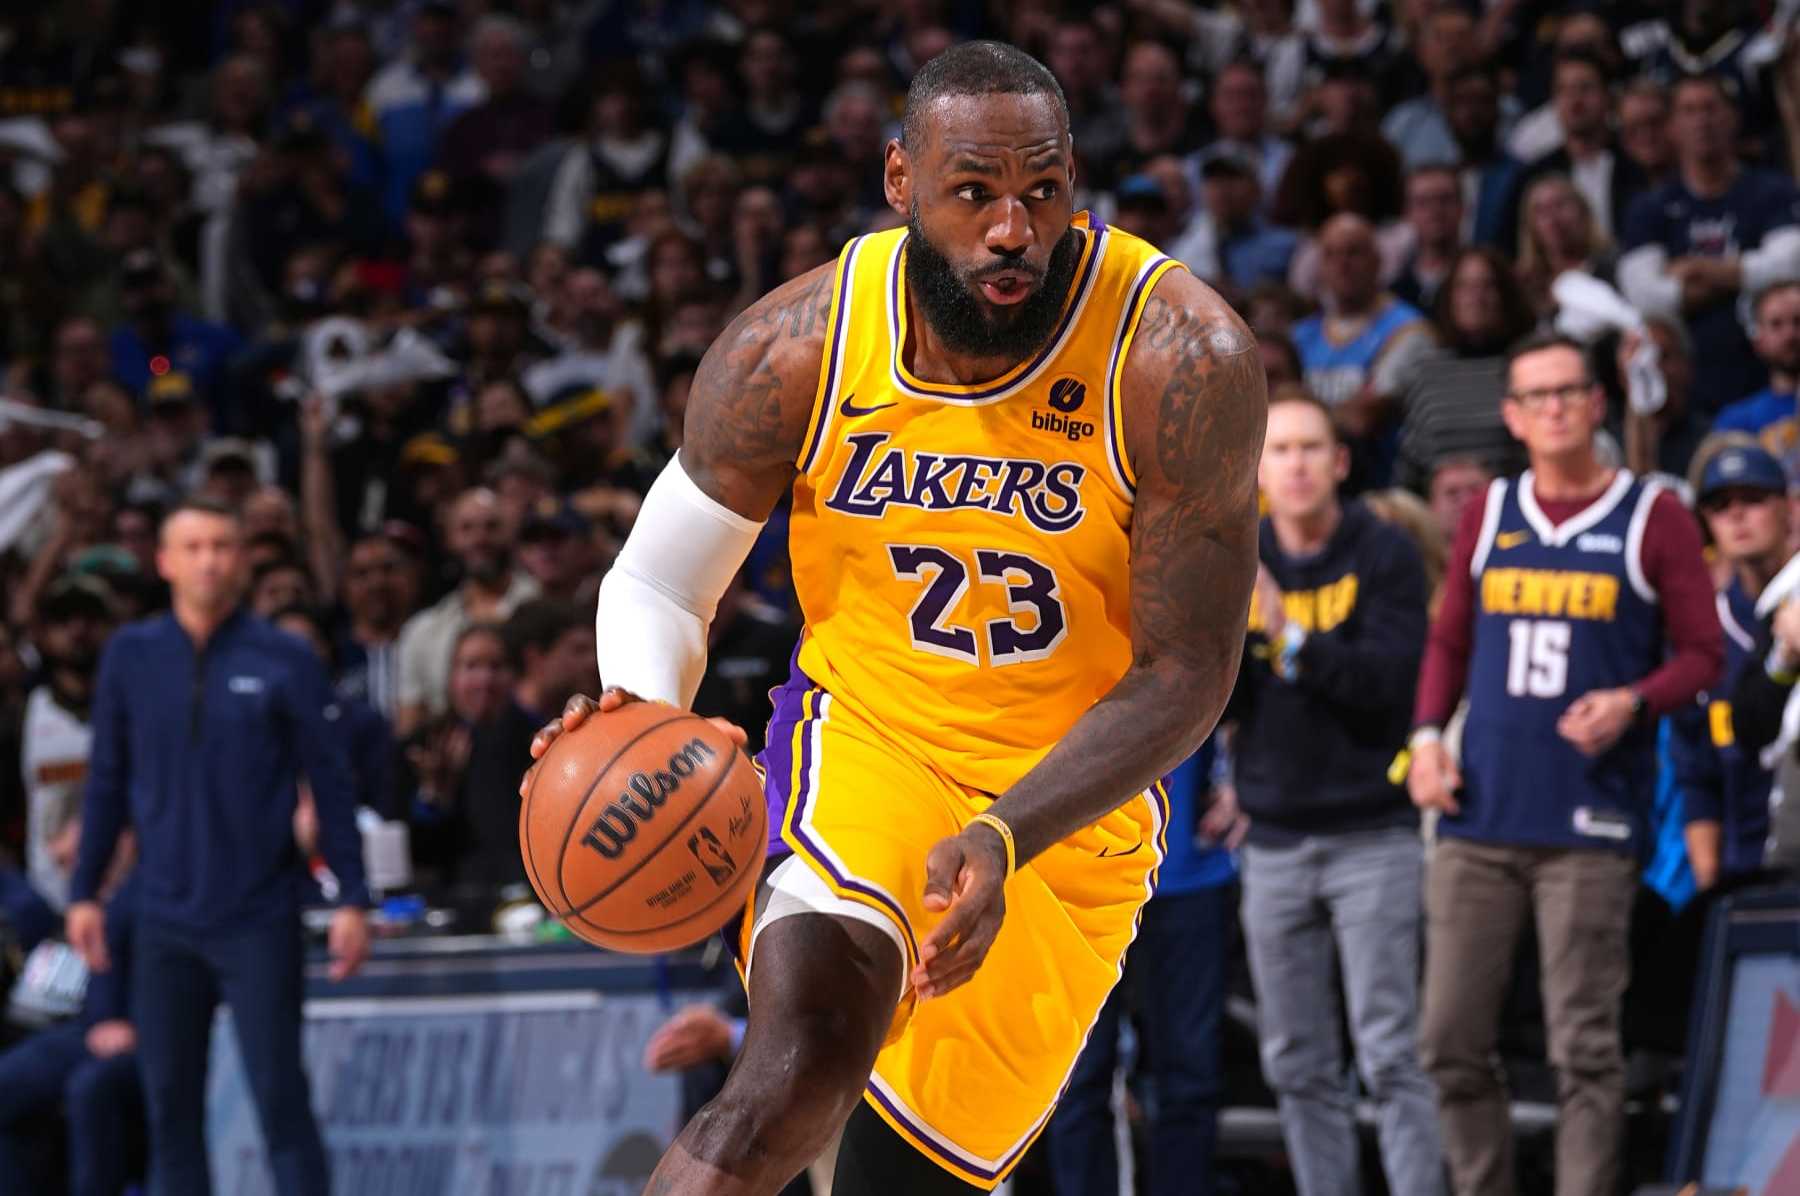 Photo: Lakers' LeBron James Teases Upcoming Nike LeBron 22 Sneaker After Wear Test | News, Scores, Highlights, Stats, and Rumors | Bleacher Report